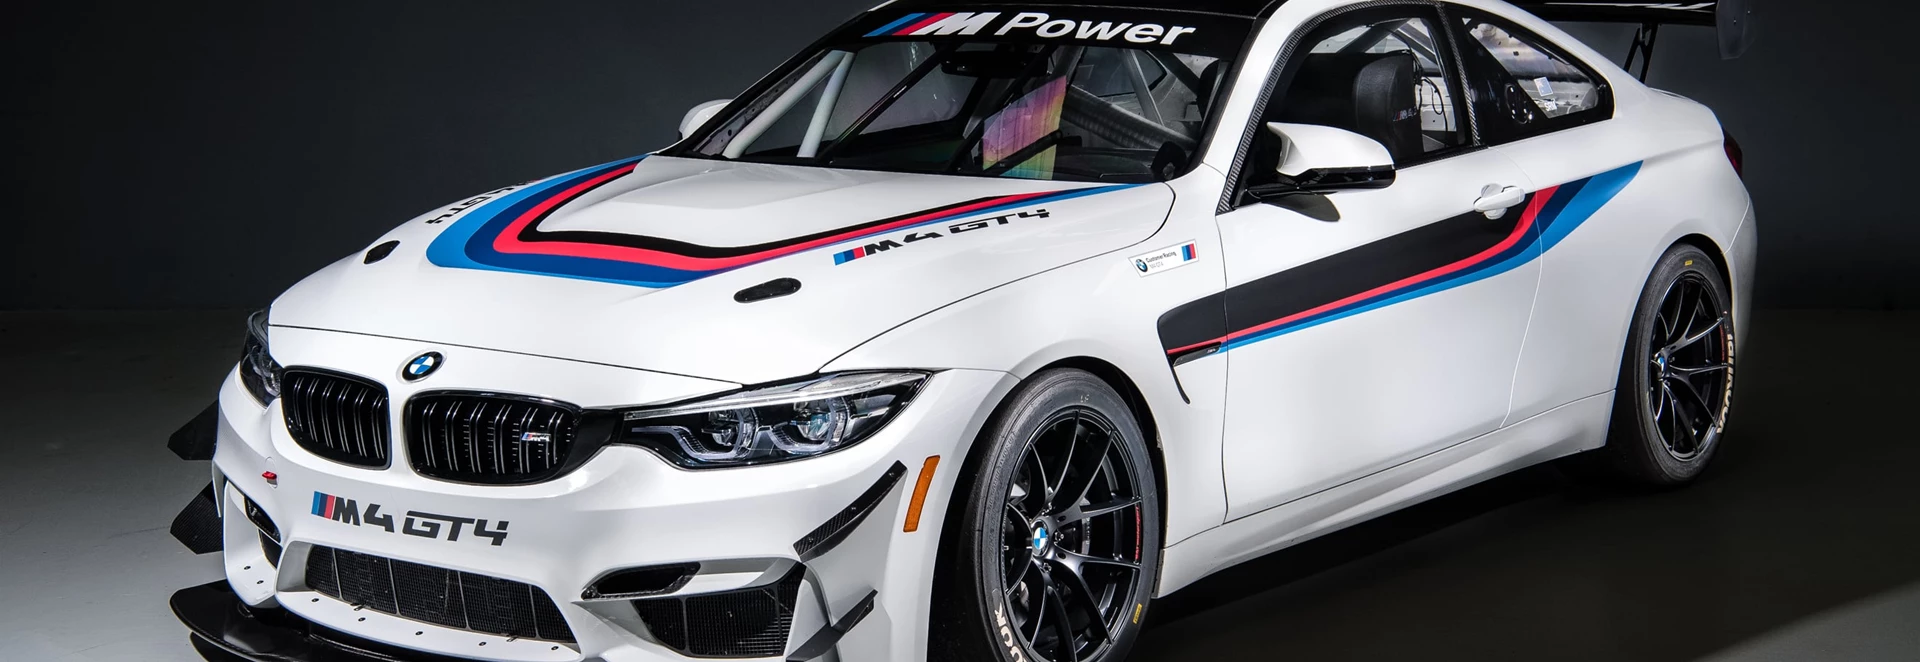 Meet the mighty BMW M4 GT4, the muscled-up racing car you can buy